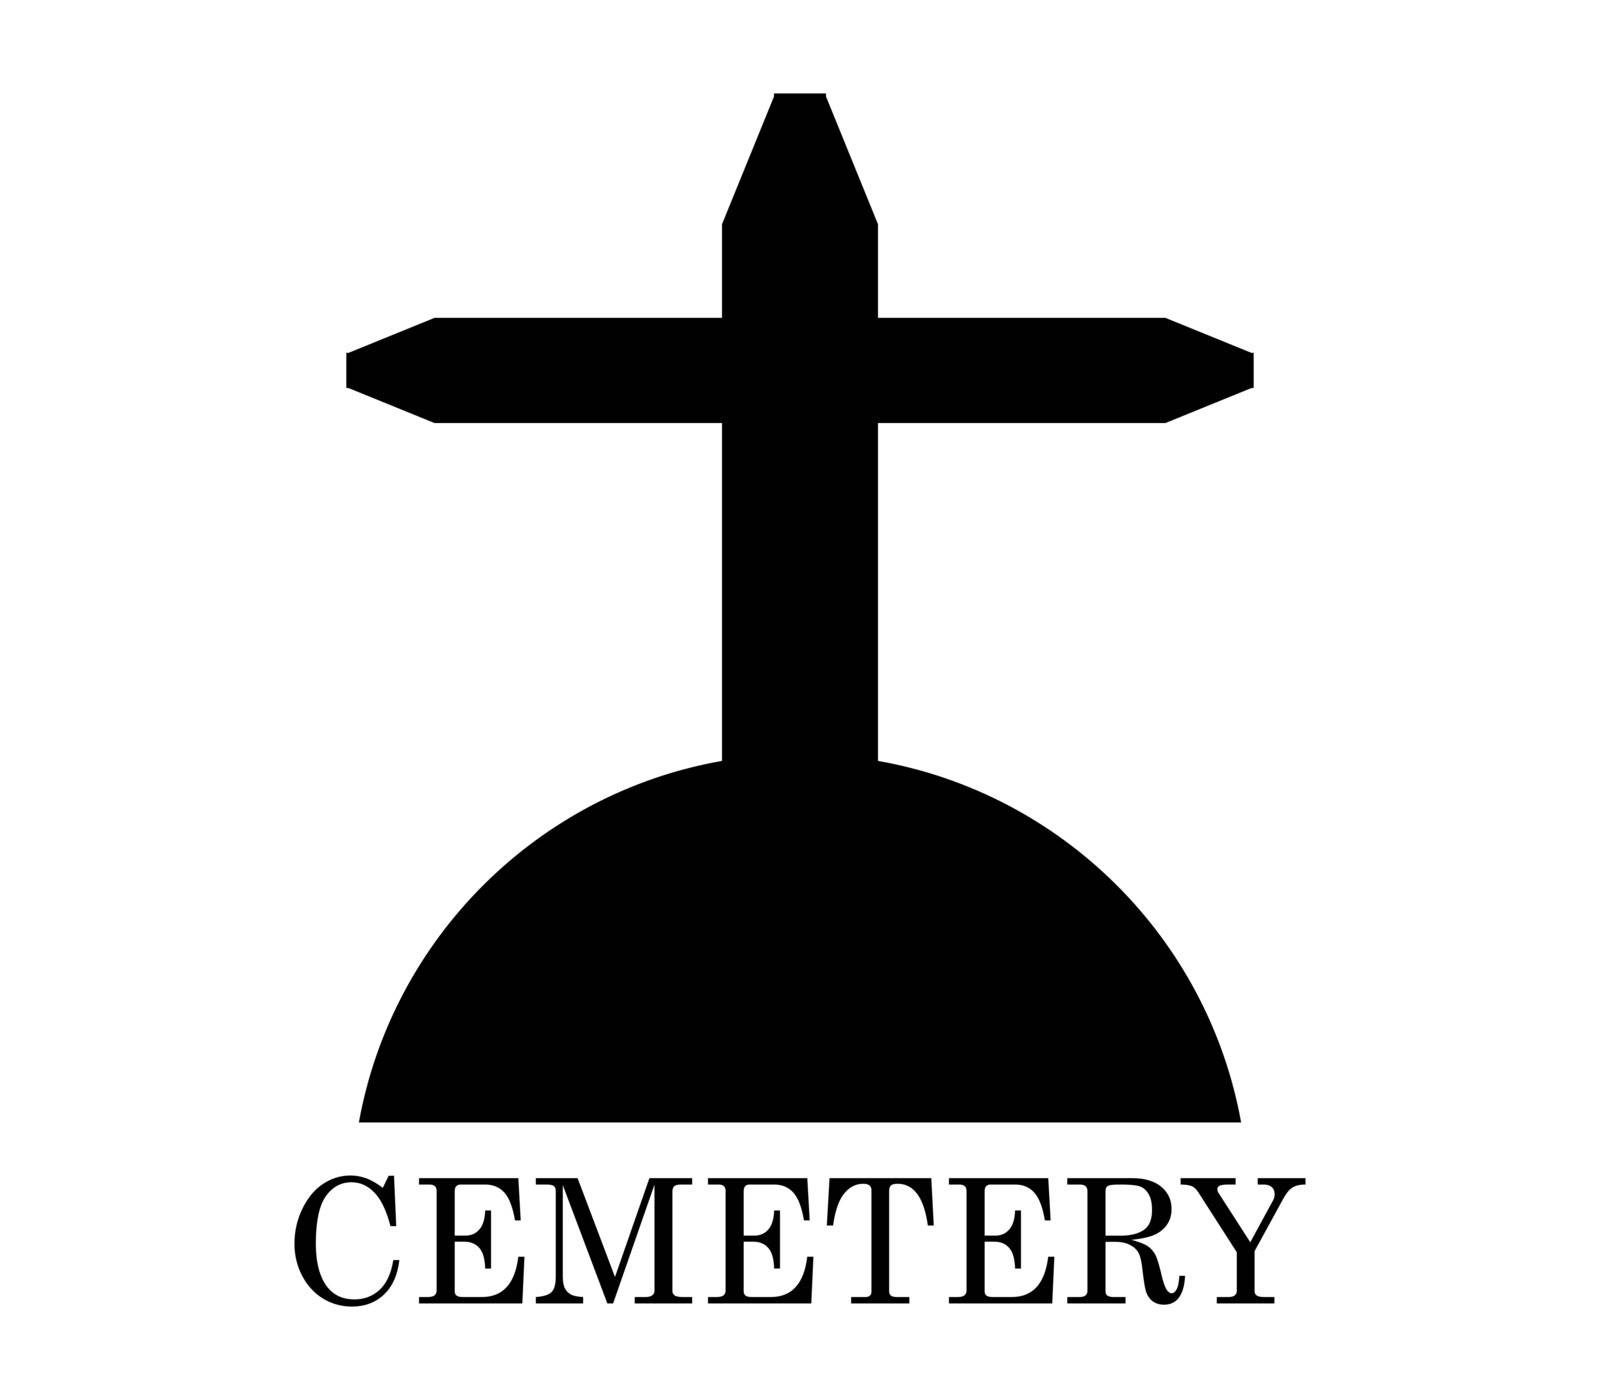 cemetery icon by Mark1987